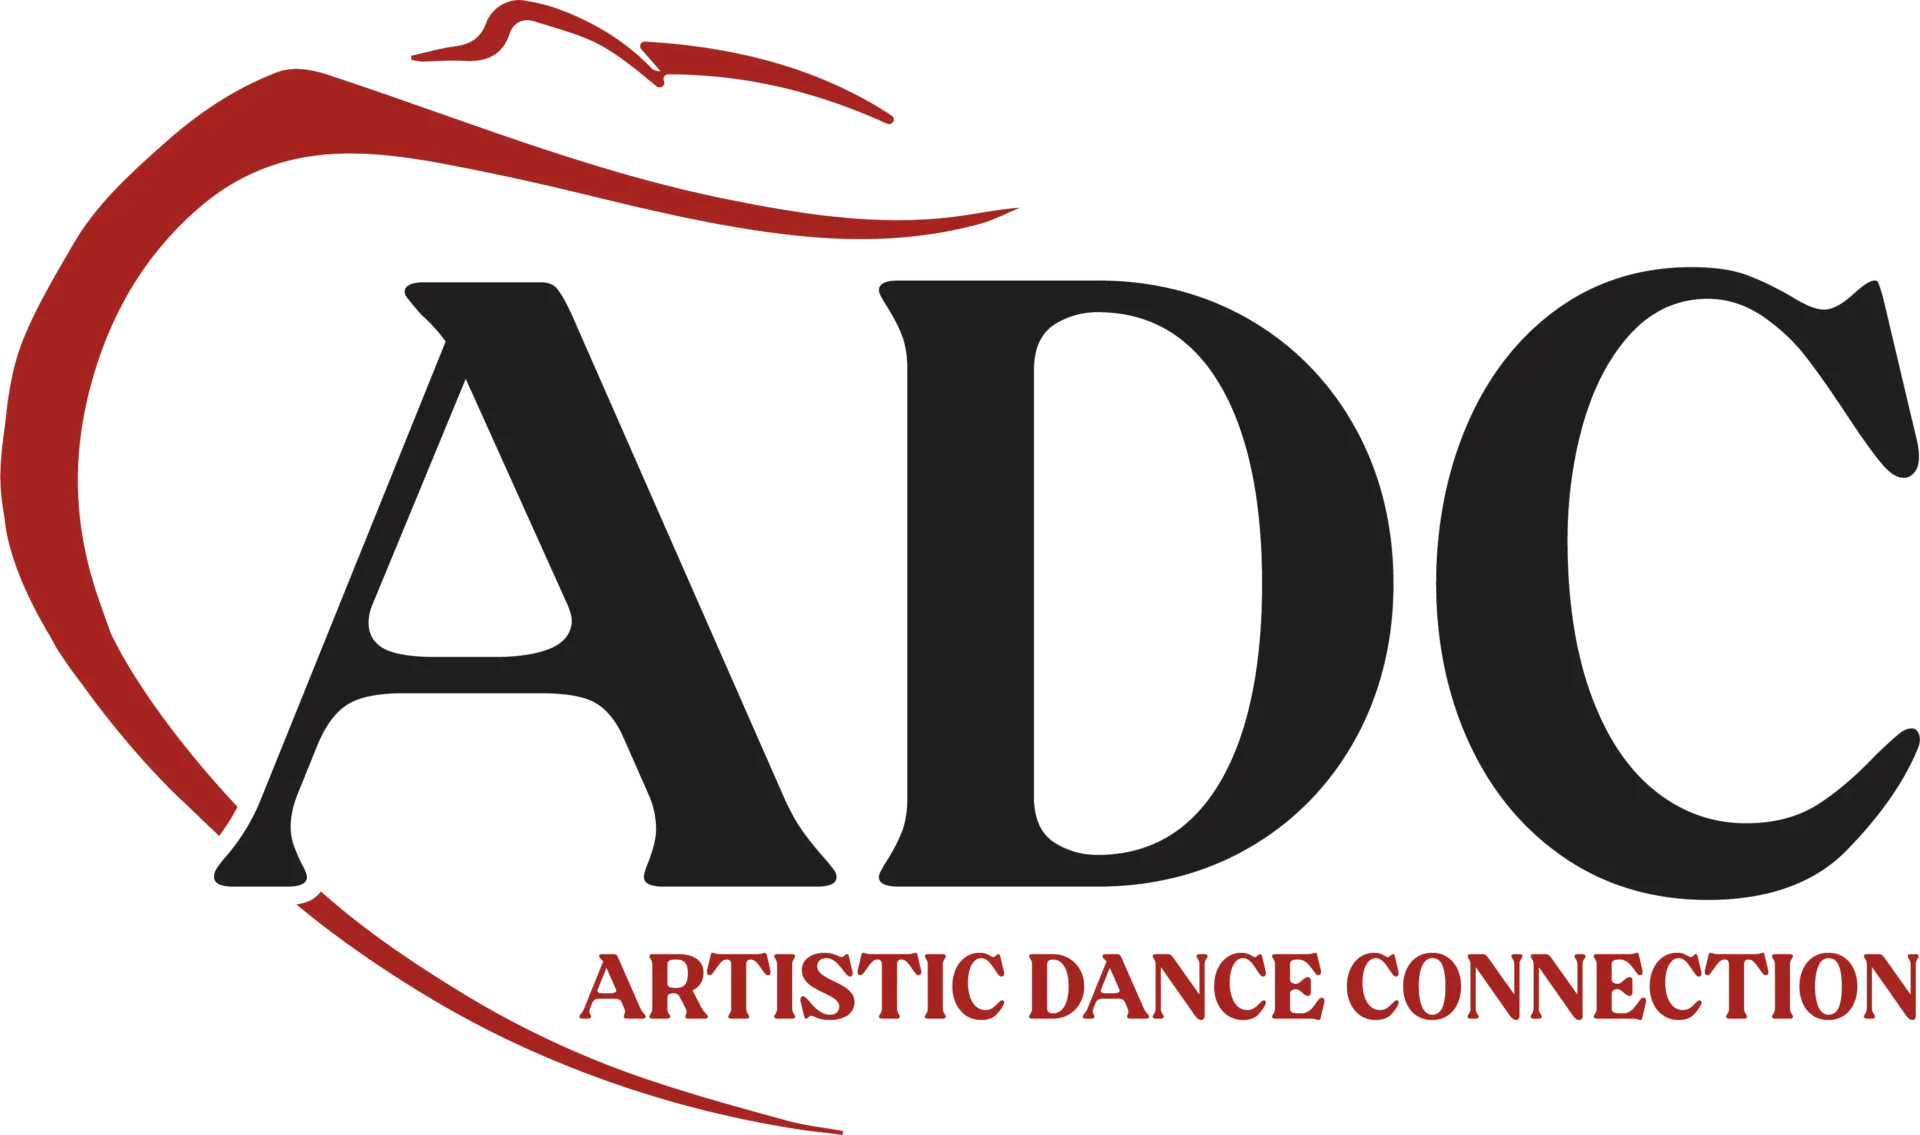 A black and red logo for artistic dance company.